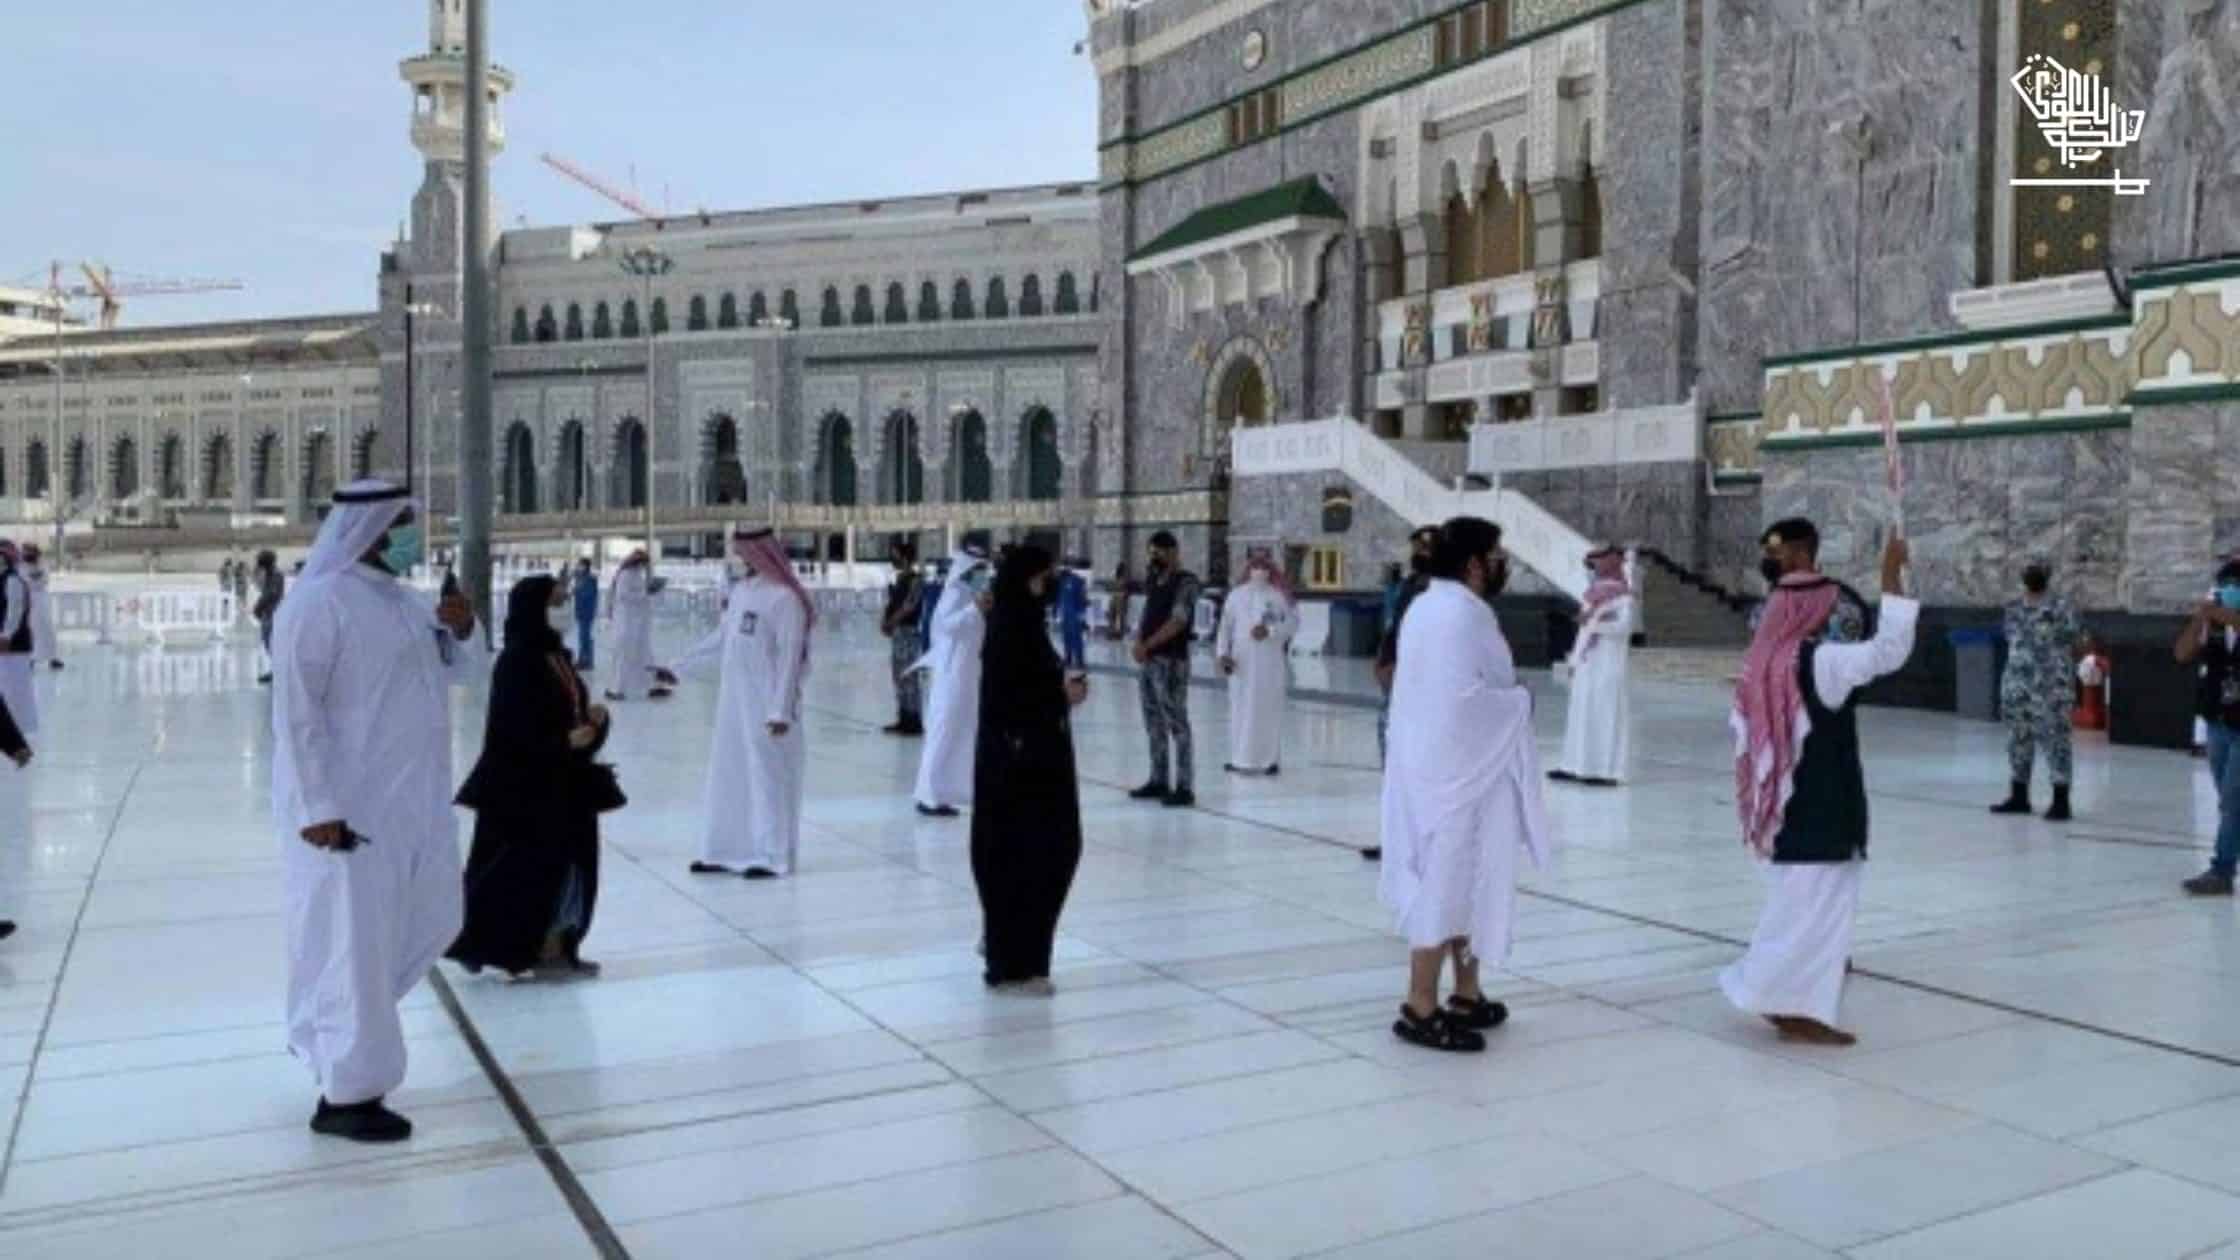 The first batch of Umrah pilgrims arrive as New COVID-19 cases drop slightly in KSA as total recoveries near 500,000